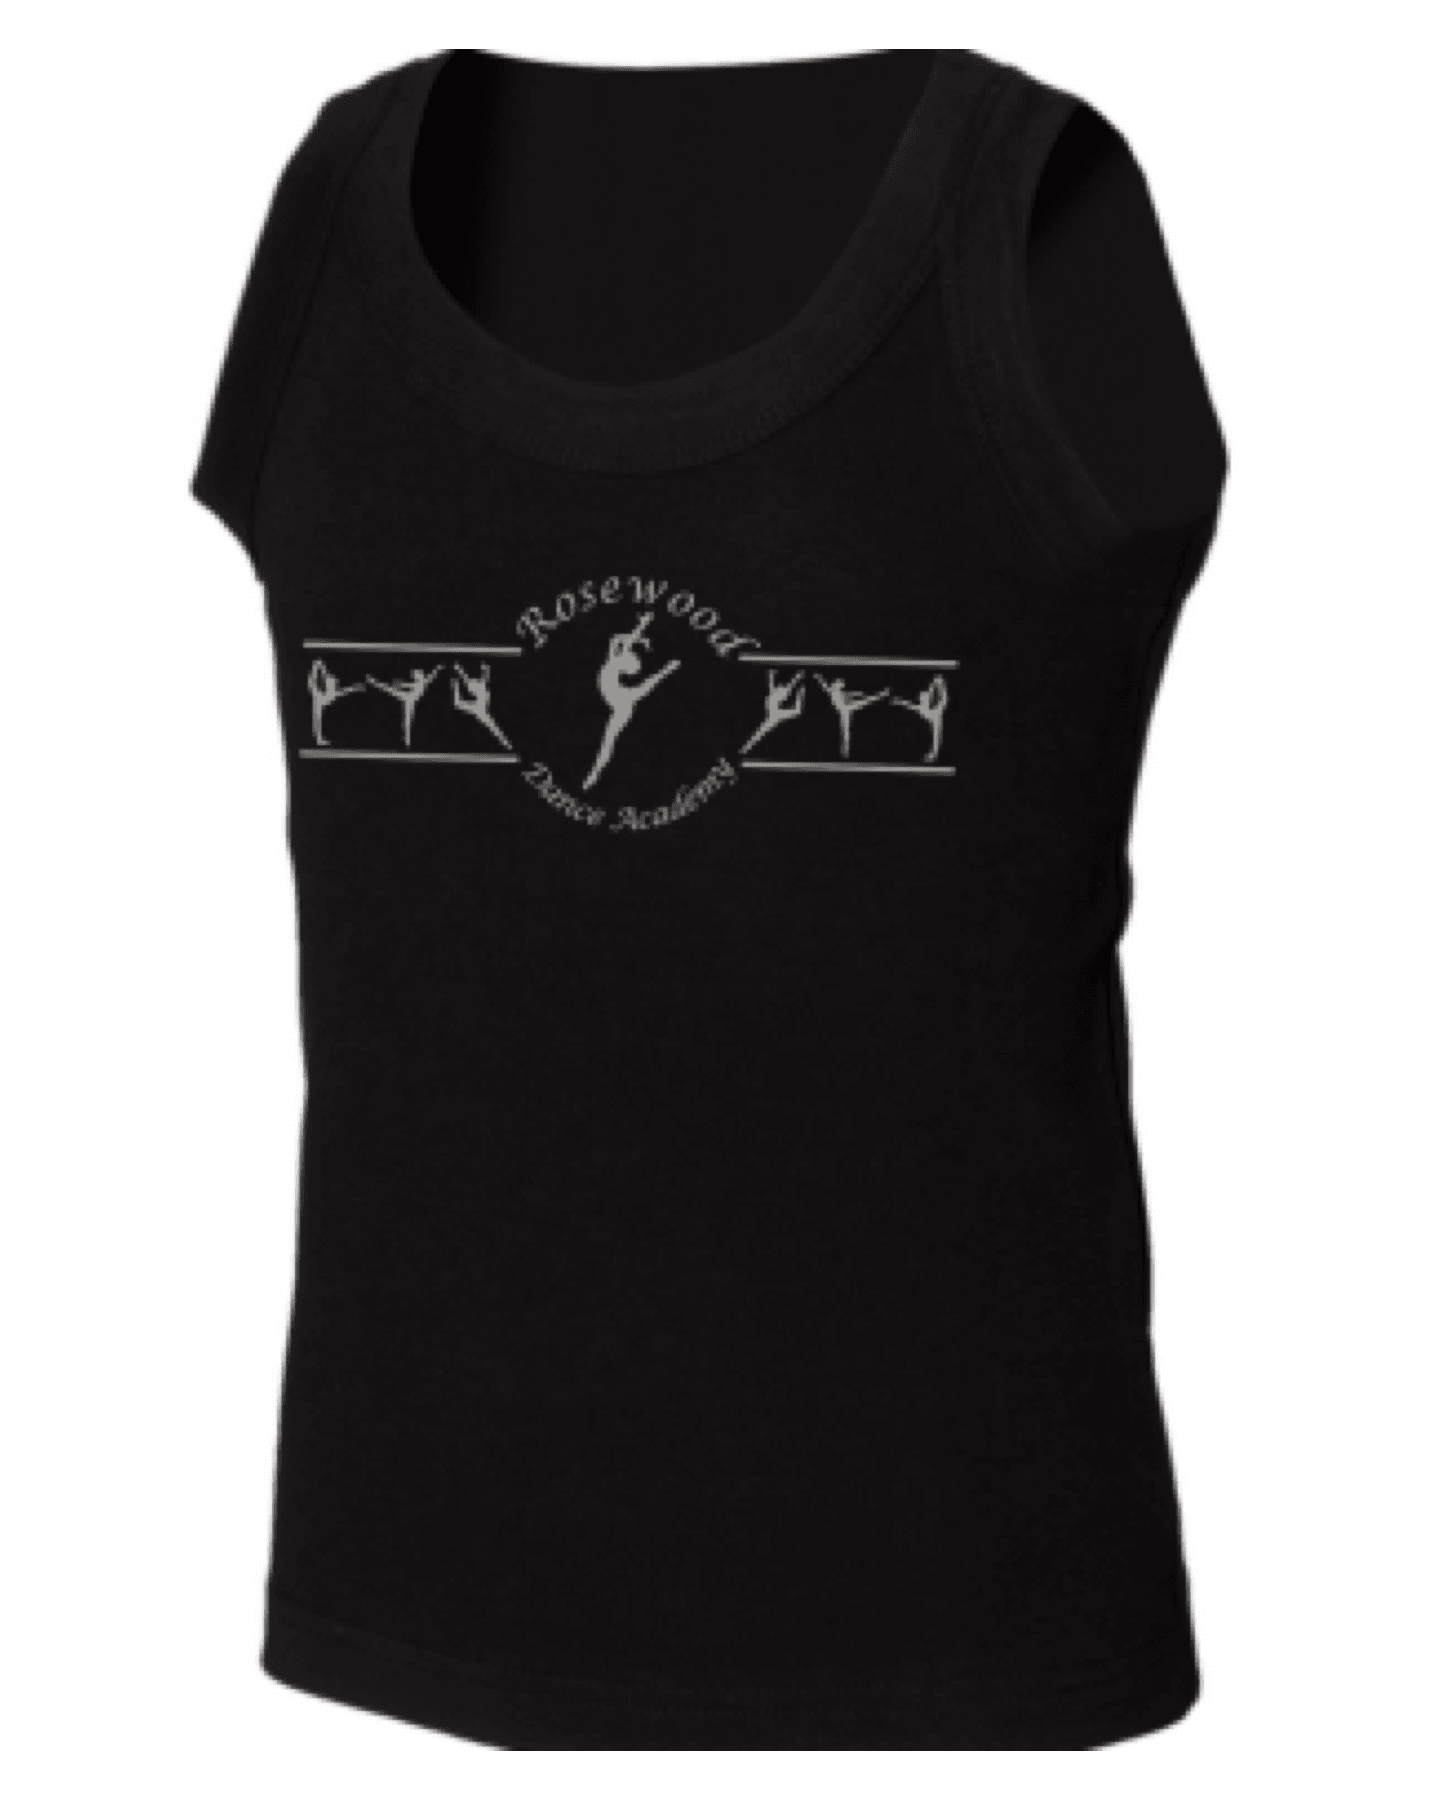 Rosewood Vest Tank Style Childrens